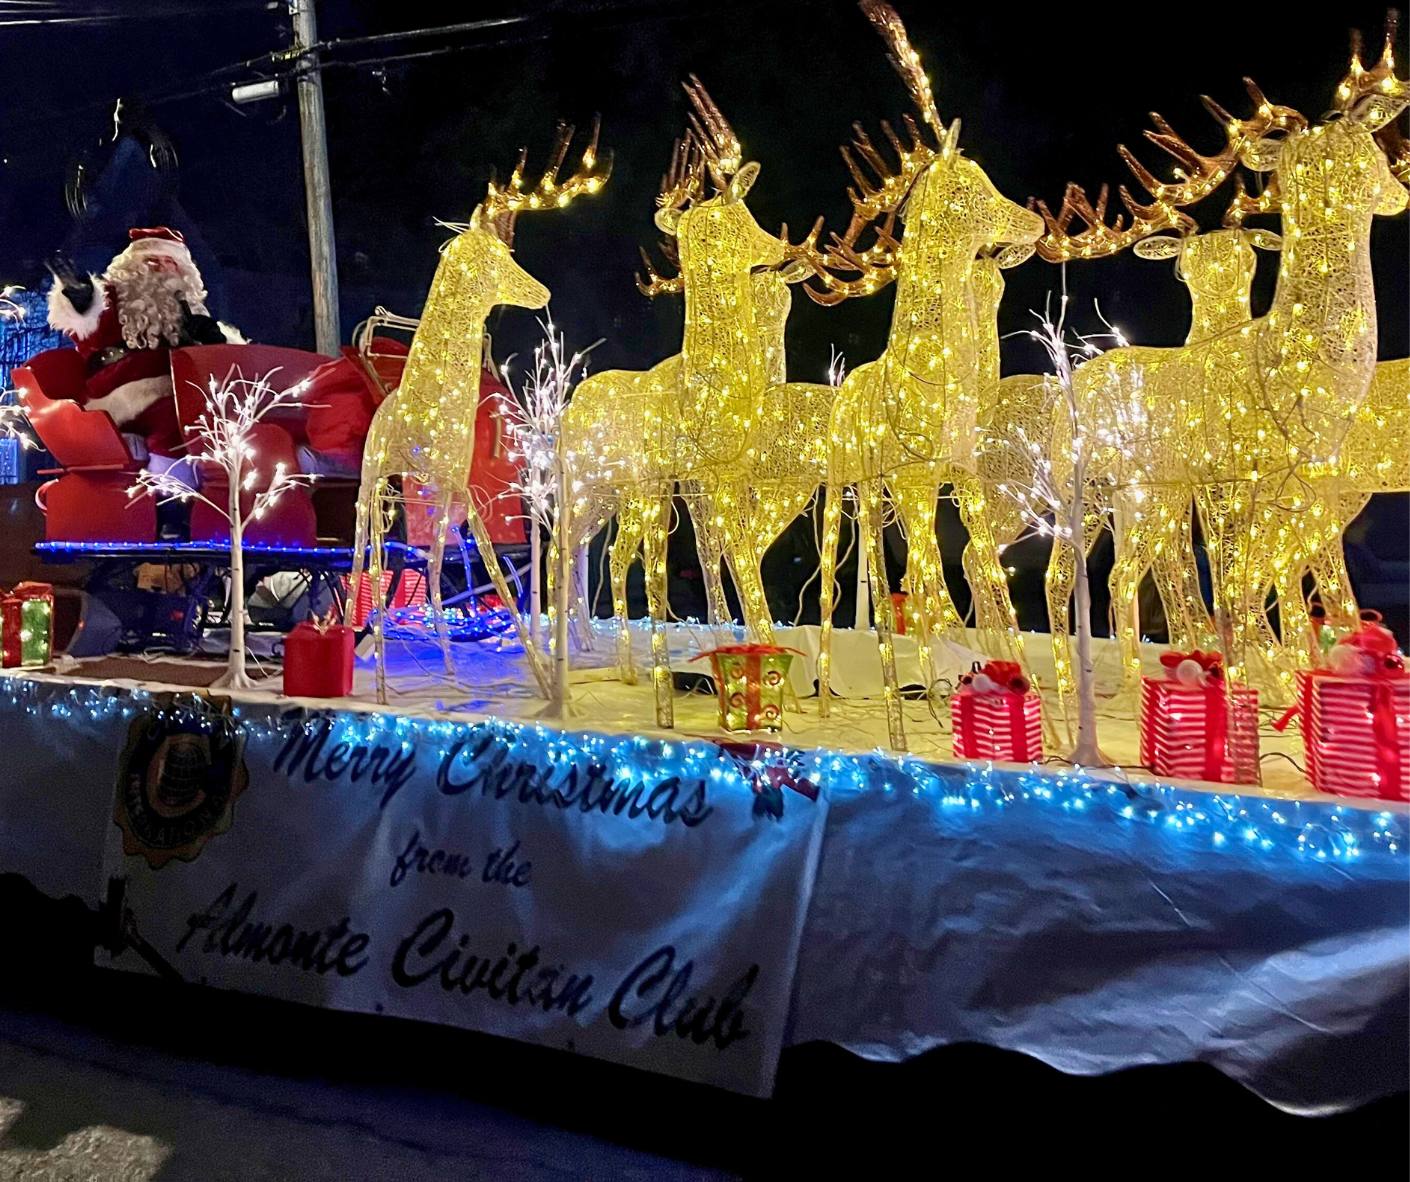 Santa Claus sits atop a sleigh in a parade float, surrounded by lighted presents and reindeer